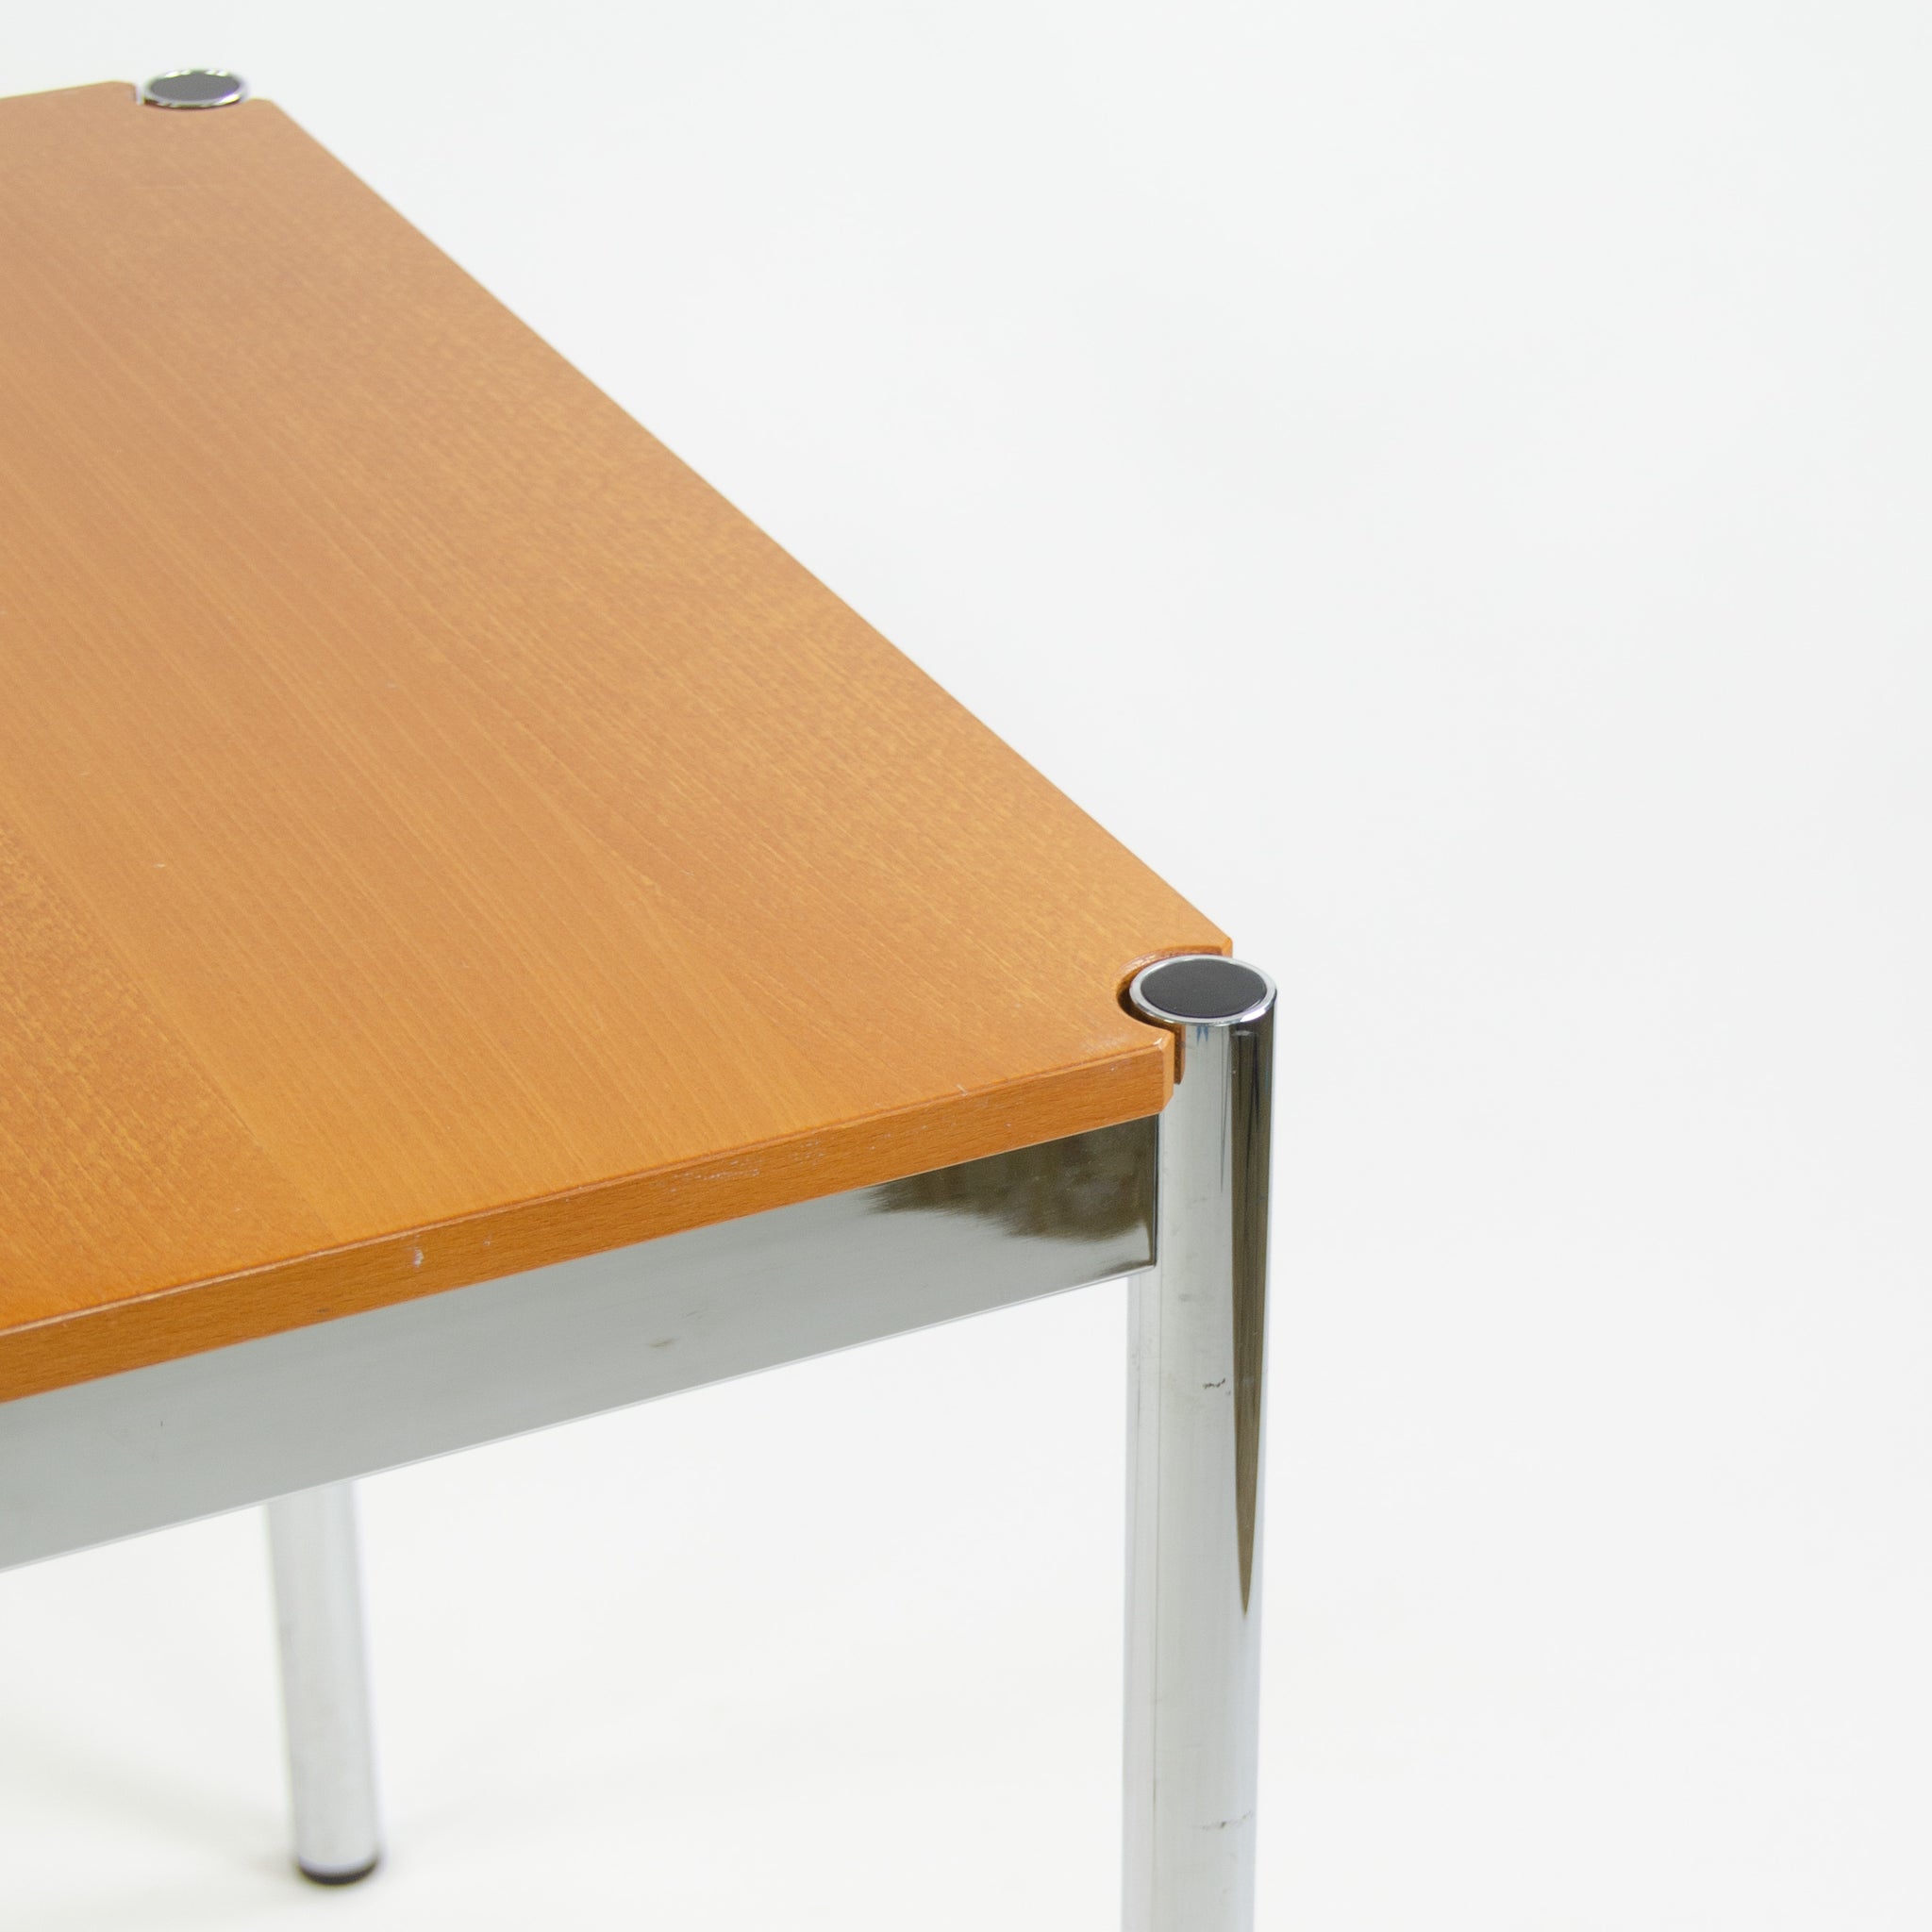 SOLD Fritz Haller USM Haller Beech Wood Square Table Modular 1500x740 Knoll Office Sets Available